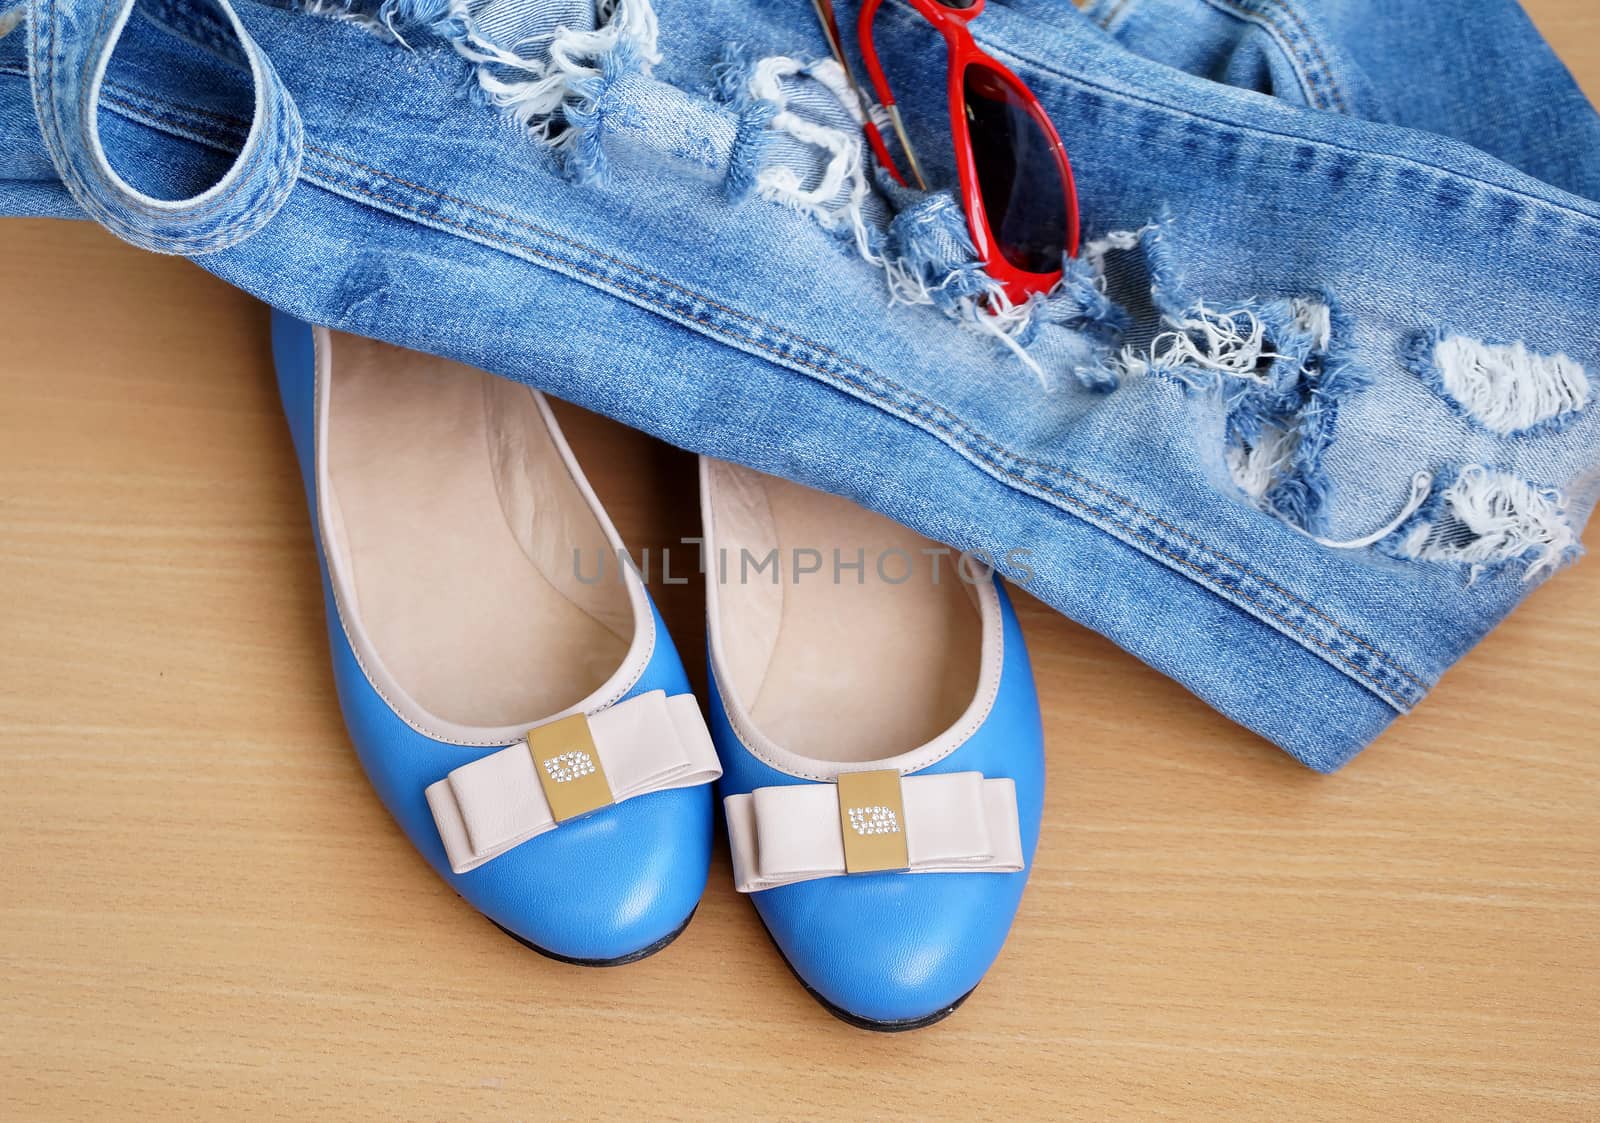 Women's shoes- "court shoes" with jeans  by Vadimdem